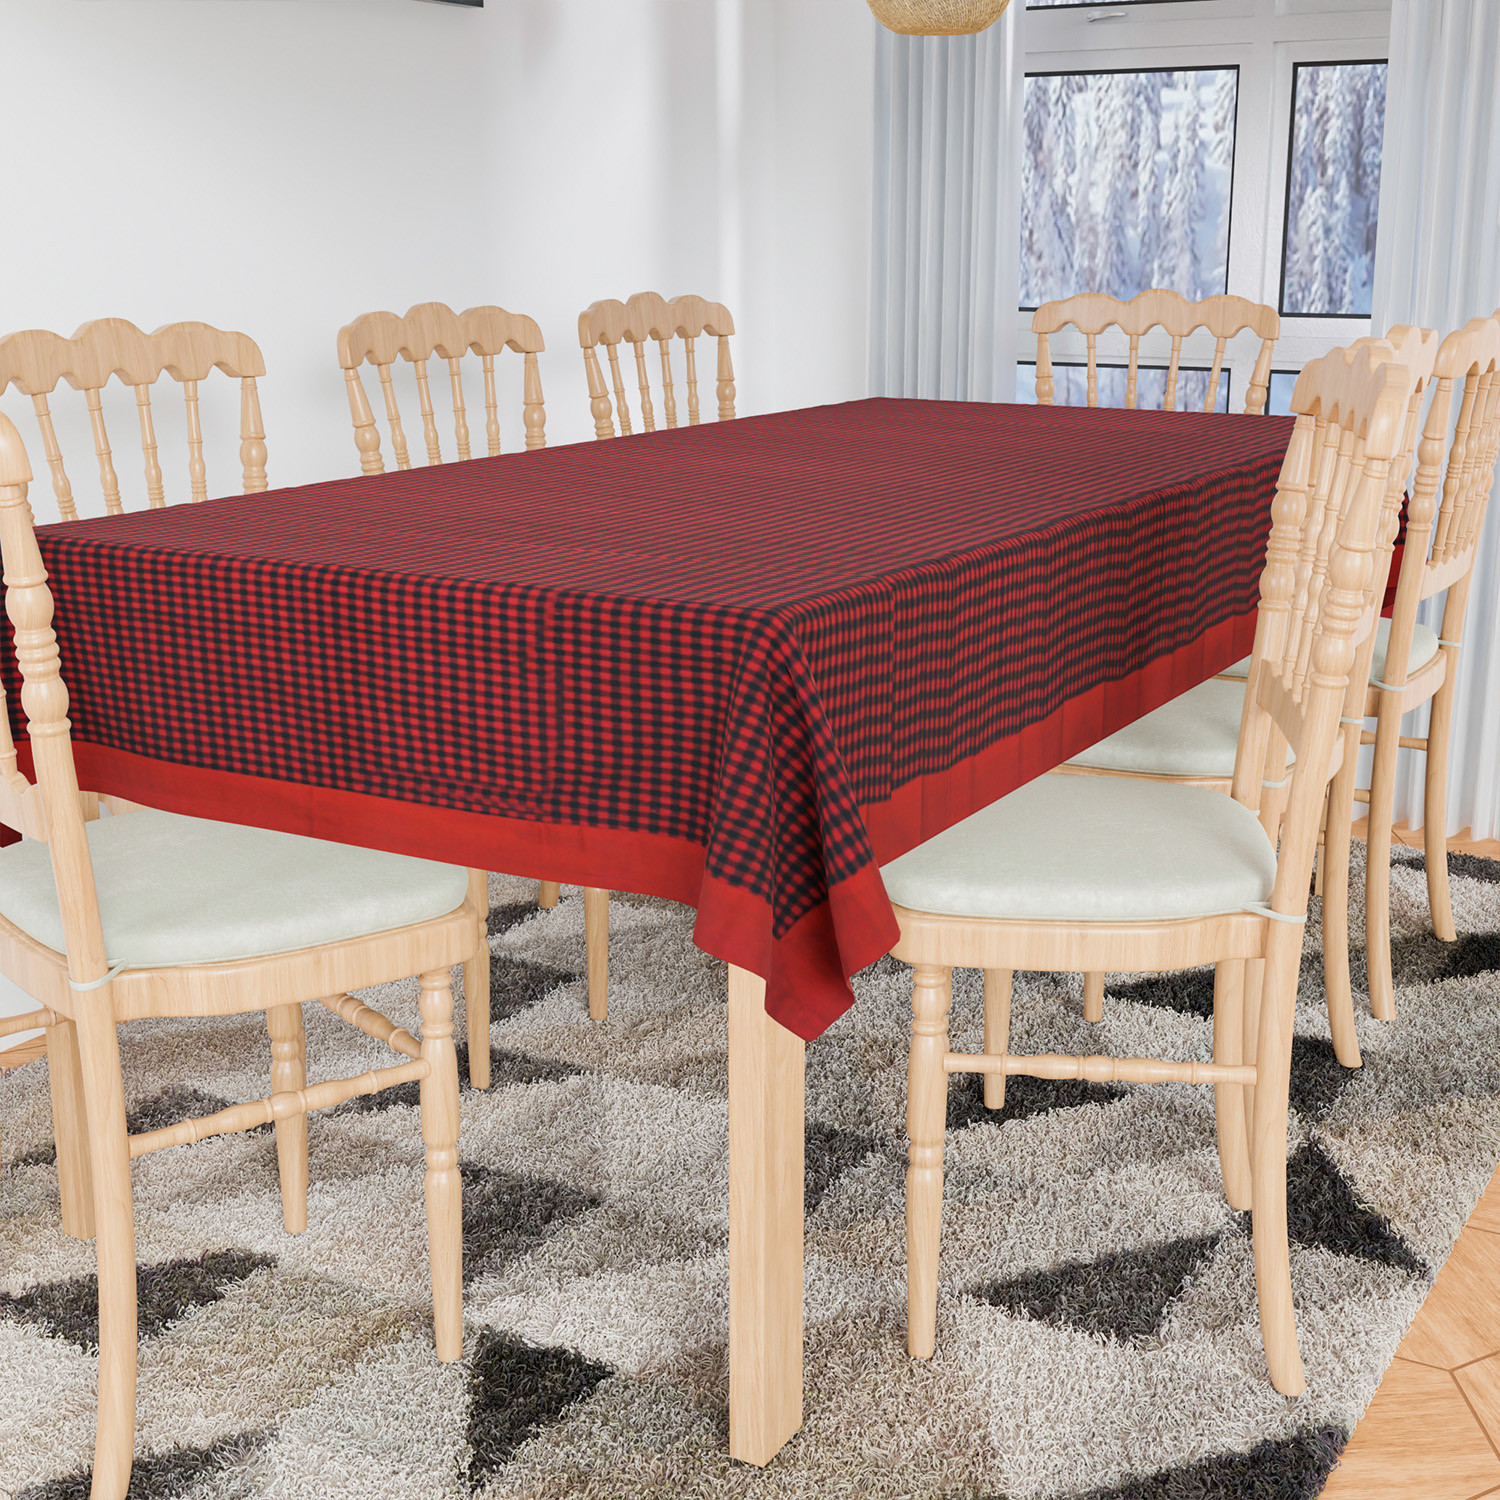 Kuber Industries Dining Table Cover | Cotton Table Cloth Cover | 8 Seater Table Cloth | Barik Check Table Cover | Table Protector | Table Cover for Dining Table | 60x108 Inch | DTC | Maroon